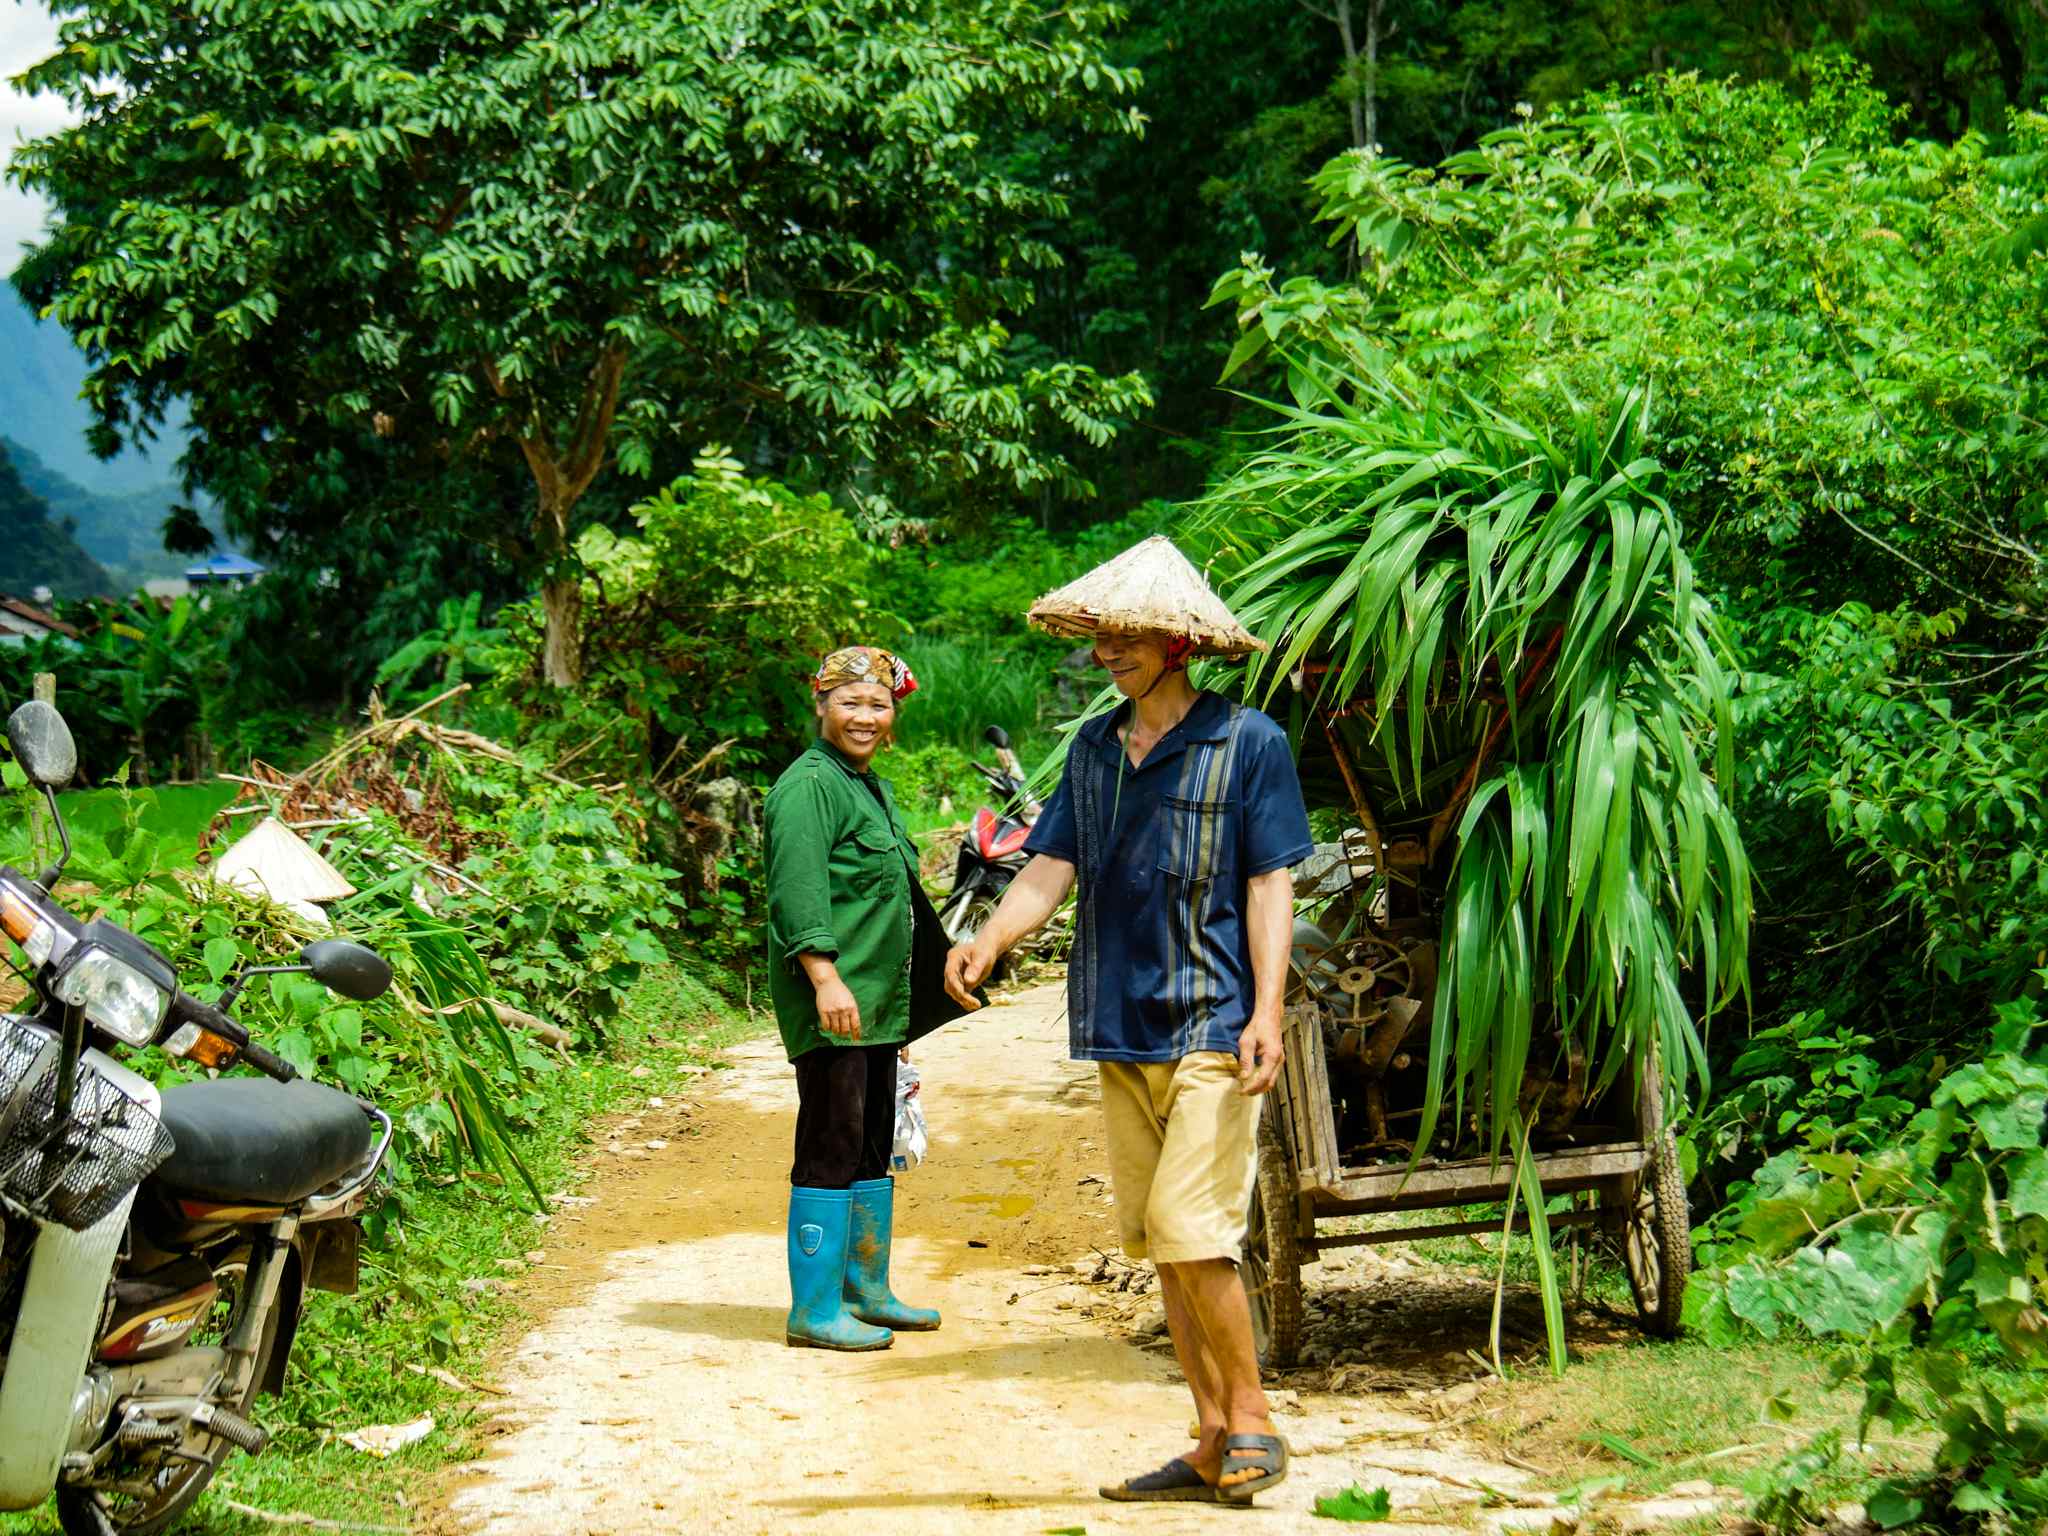 Locals in the Cao Bang region of Vietnam. Photo: Host/Easia Active
